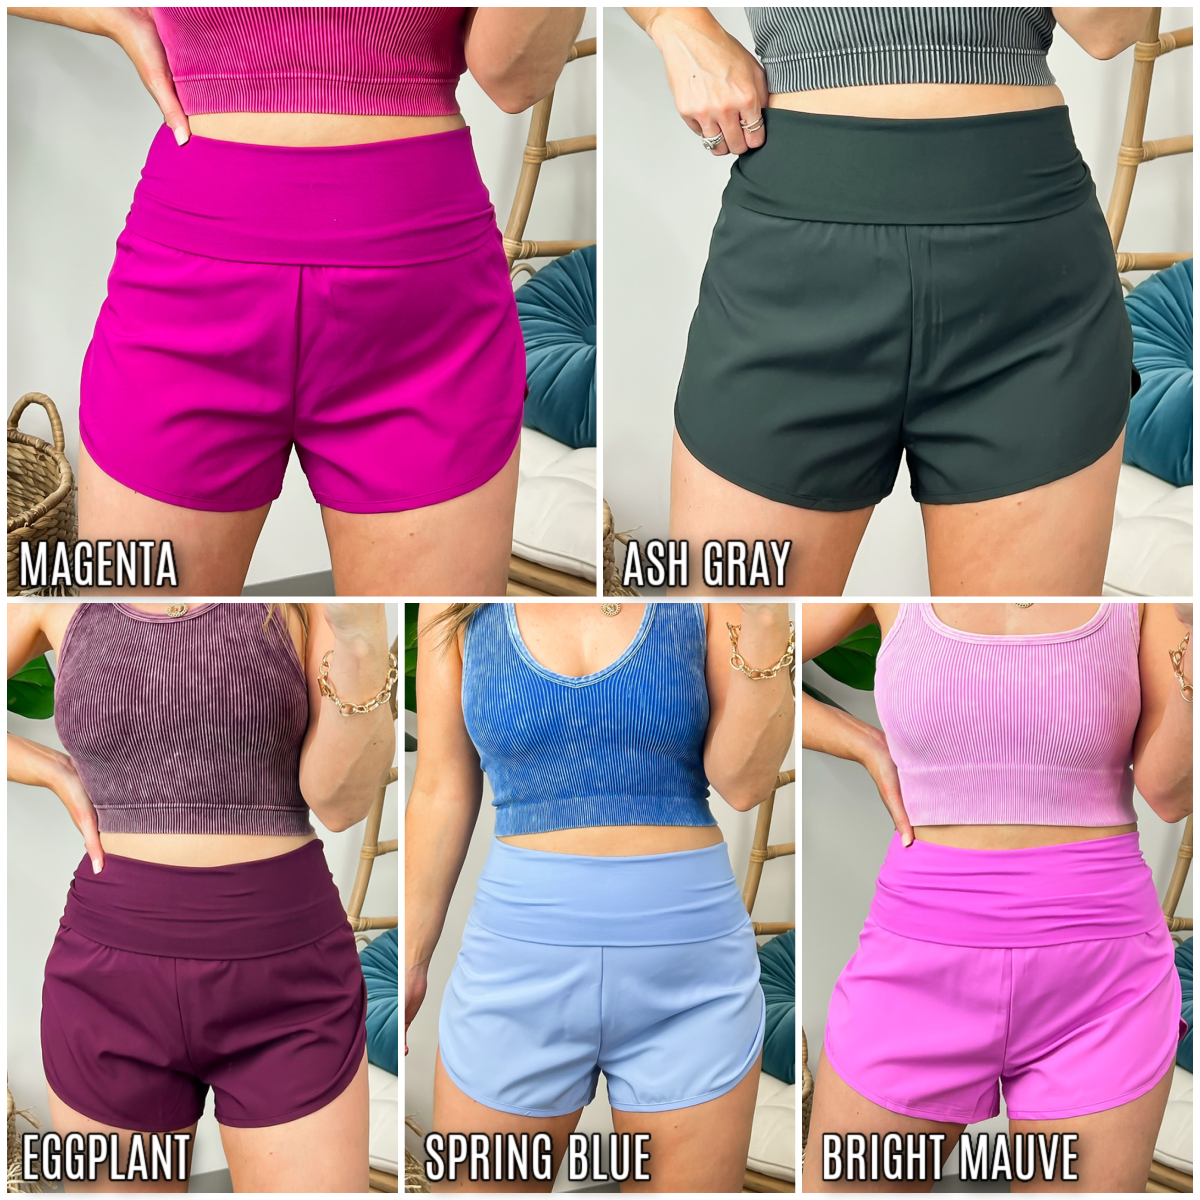  Carefree Weekend High Waist Fold Over Active Shorts - FINAL SALE - Madison and Mallory